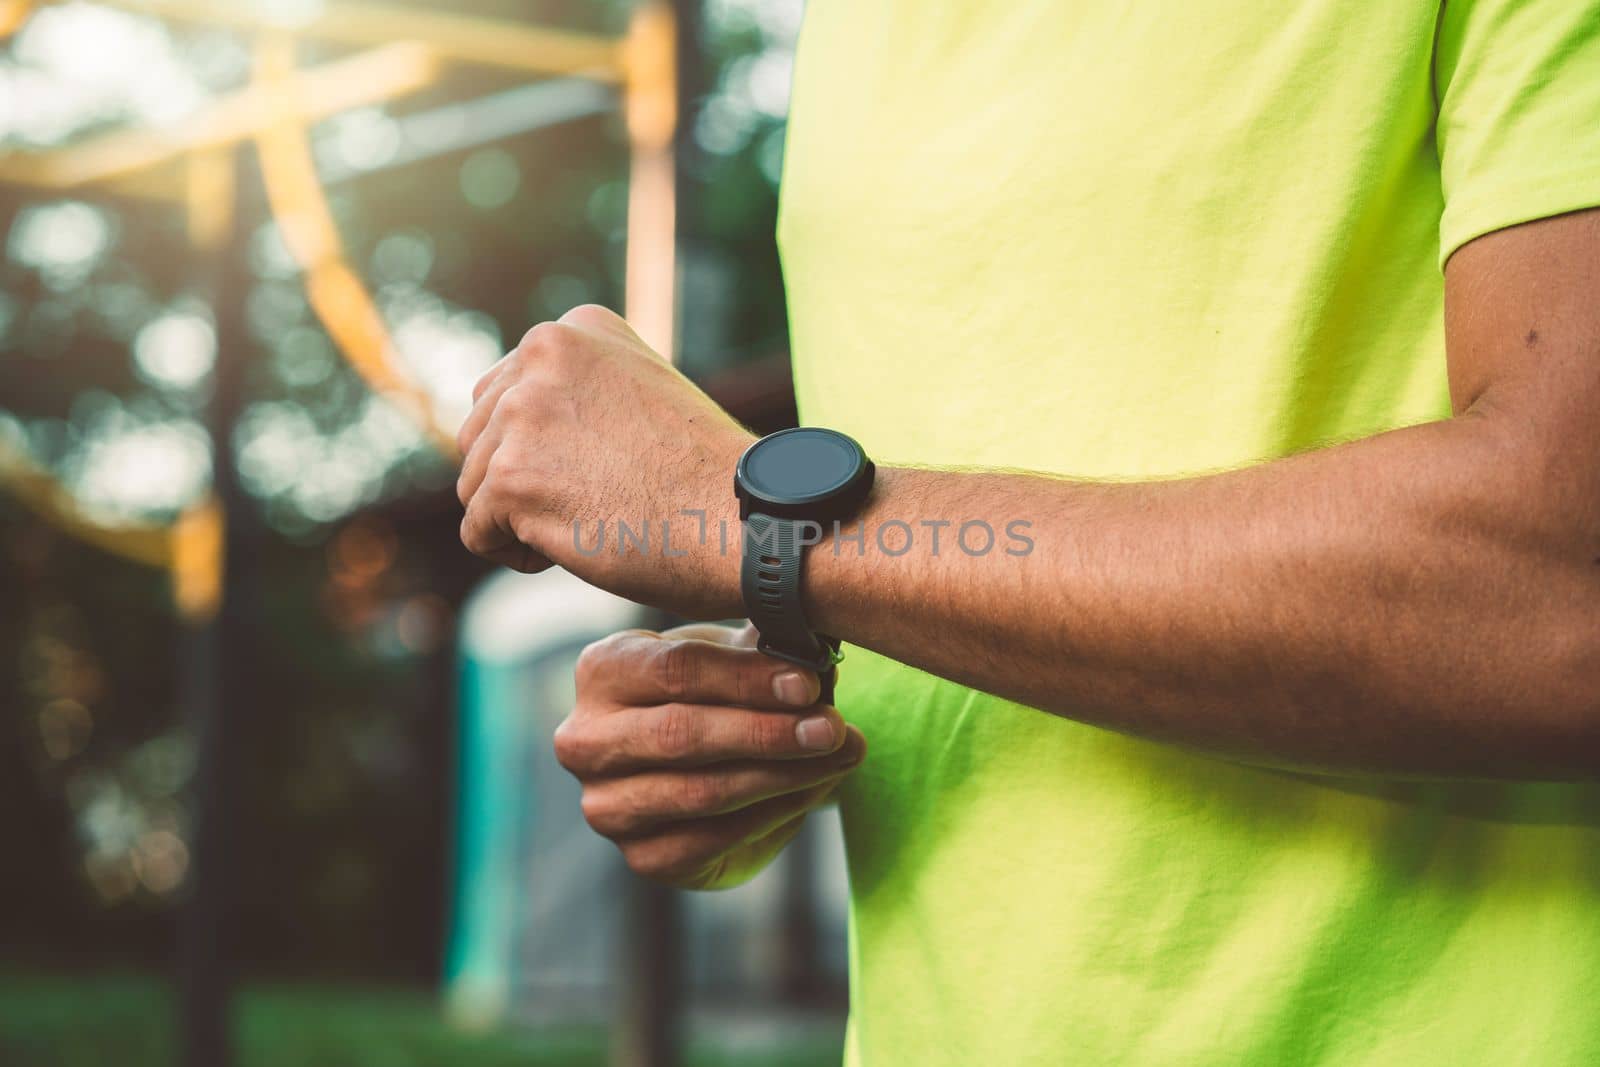 Fit man in green shirt wearing a sports watch during his run by VisualProductions